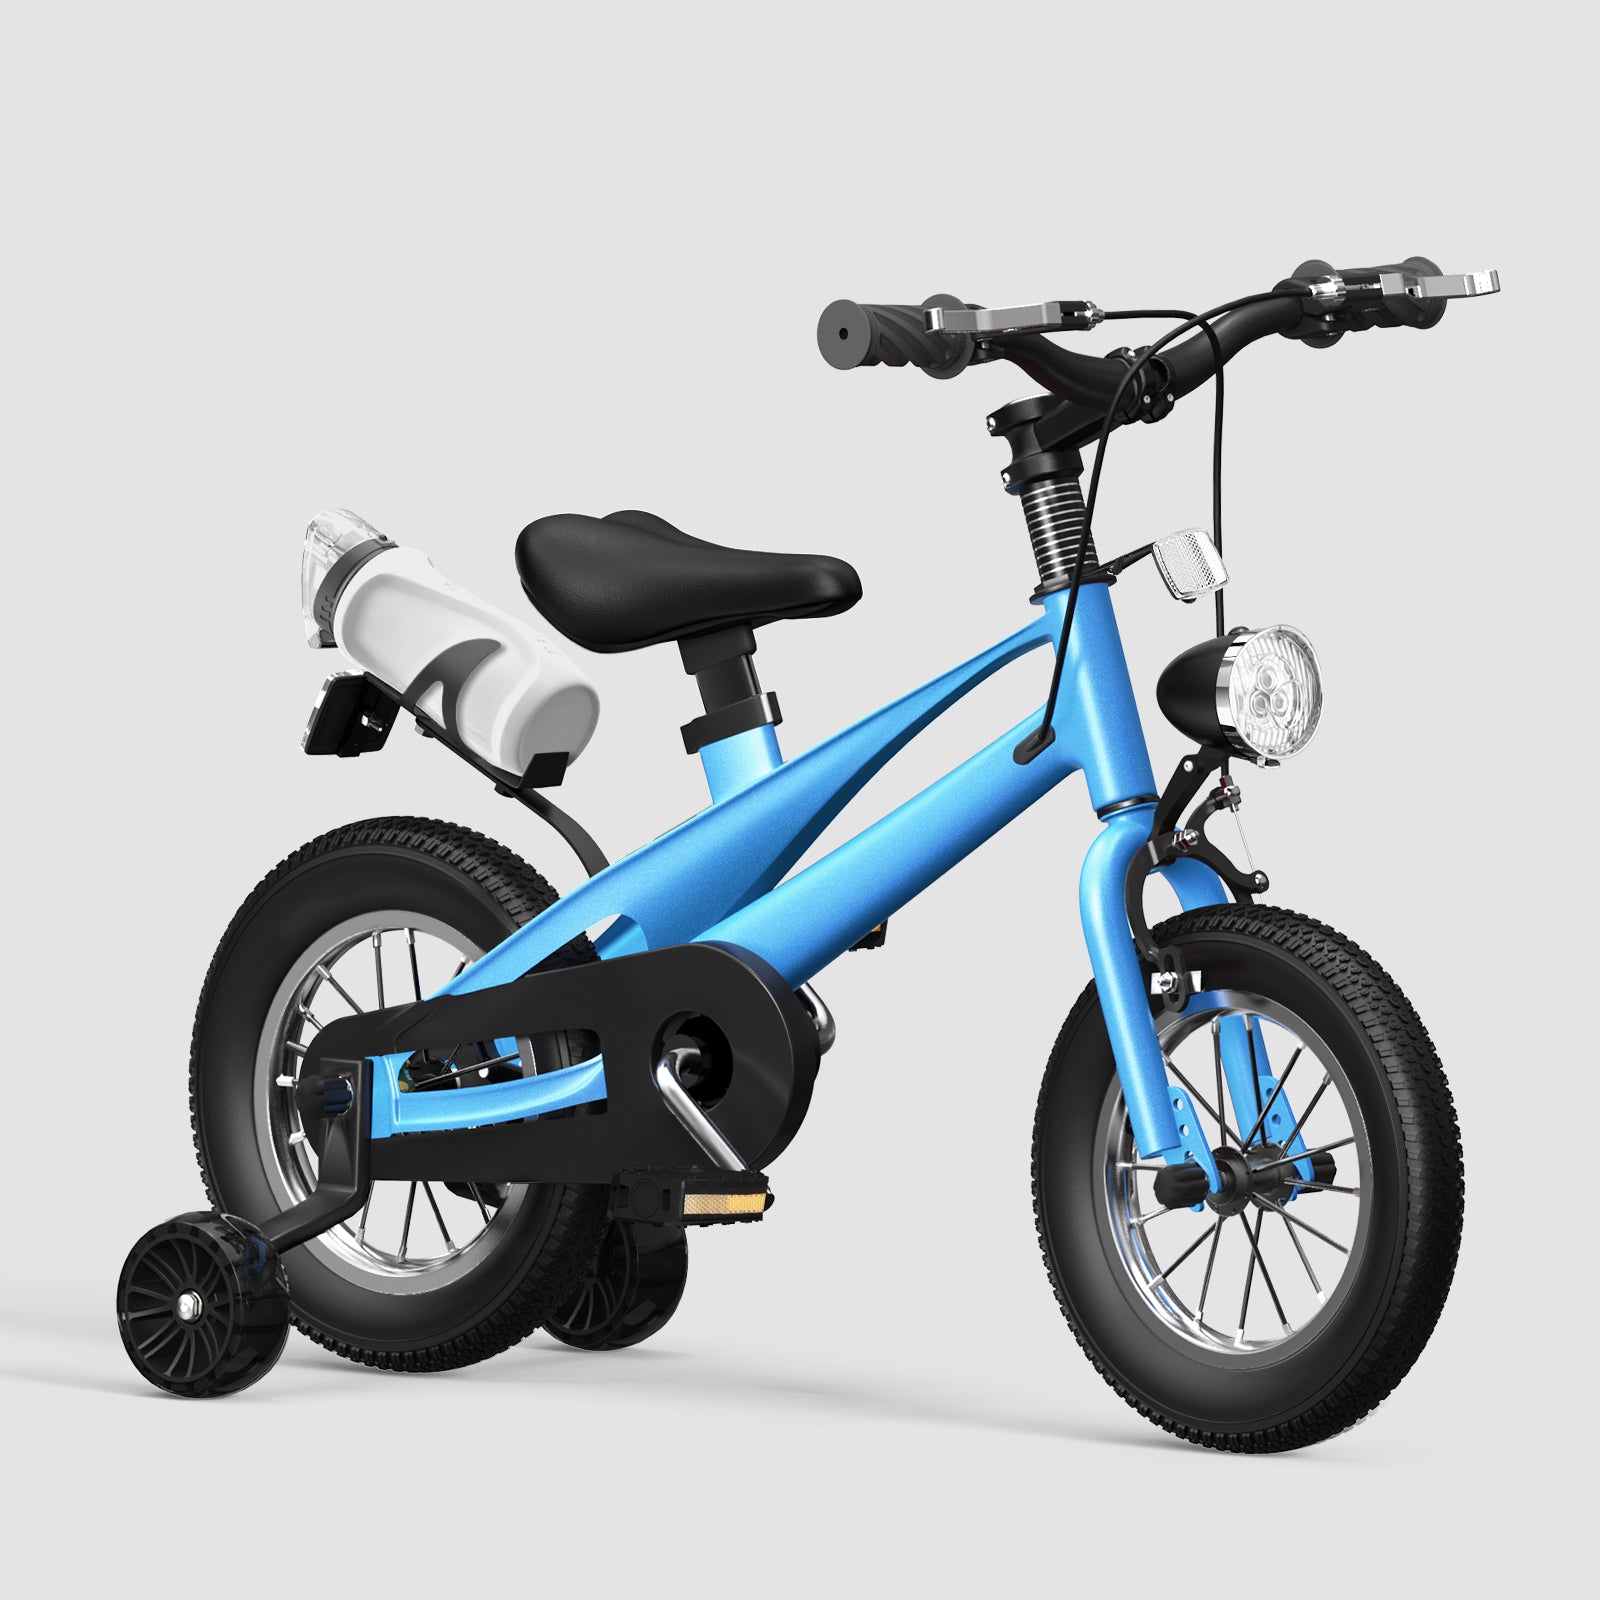 HARPPA Surgo | Kids Bike: Ages 3-6, Sizes 12, 14 16 Inch, Perfect for Boys & Girls with Training Wheels